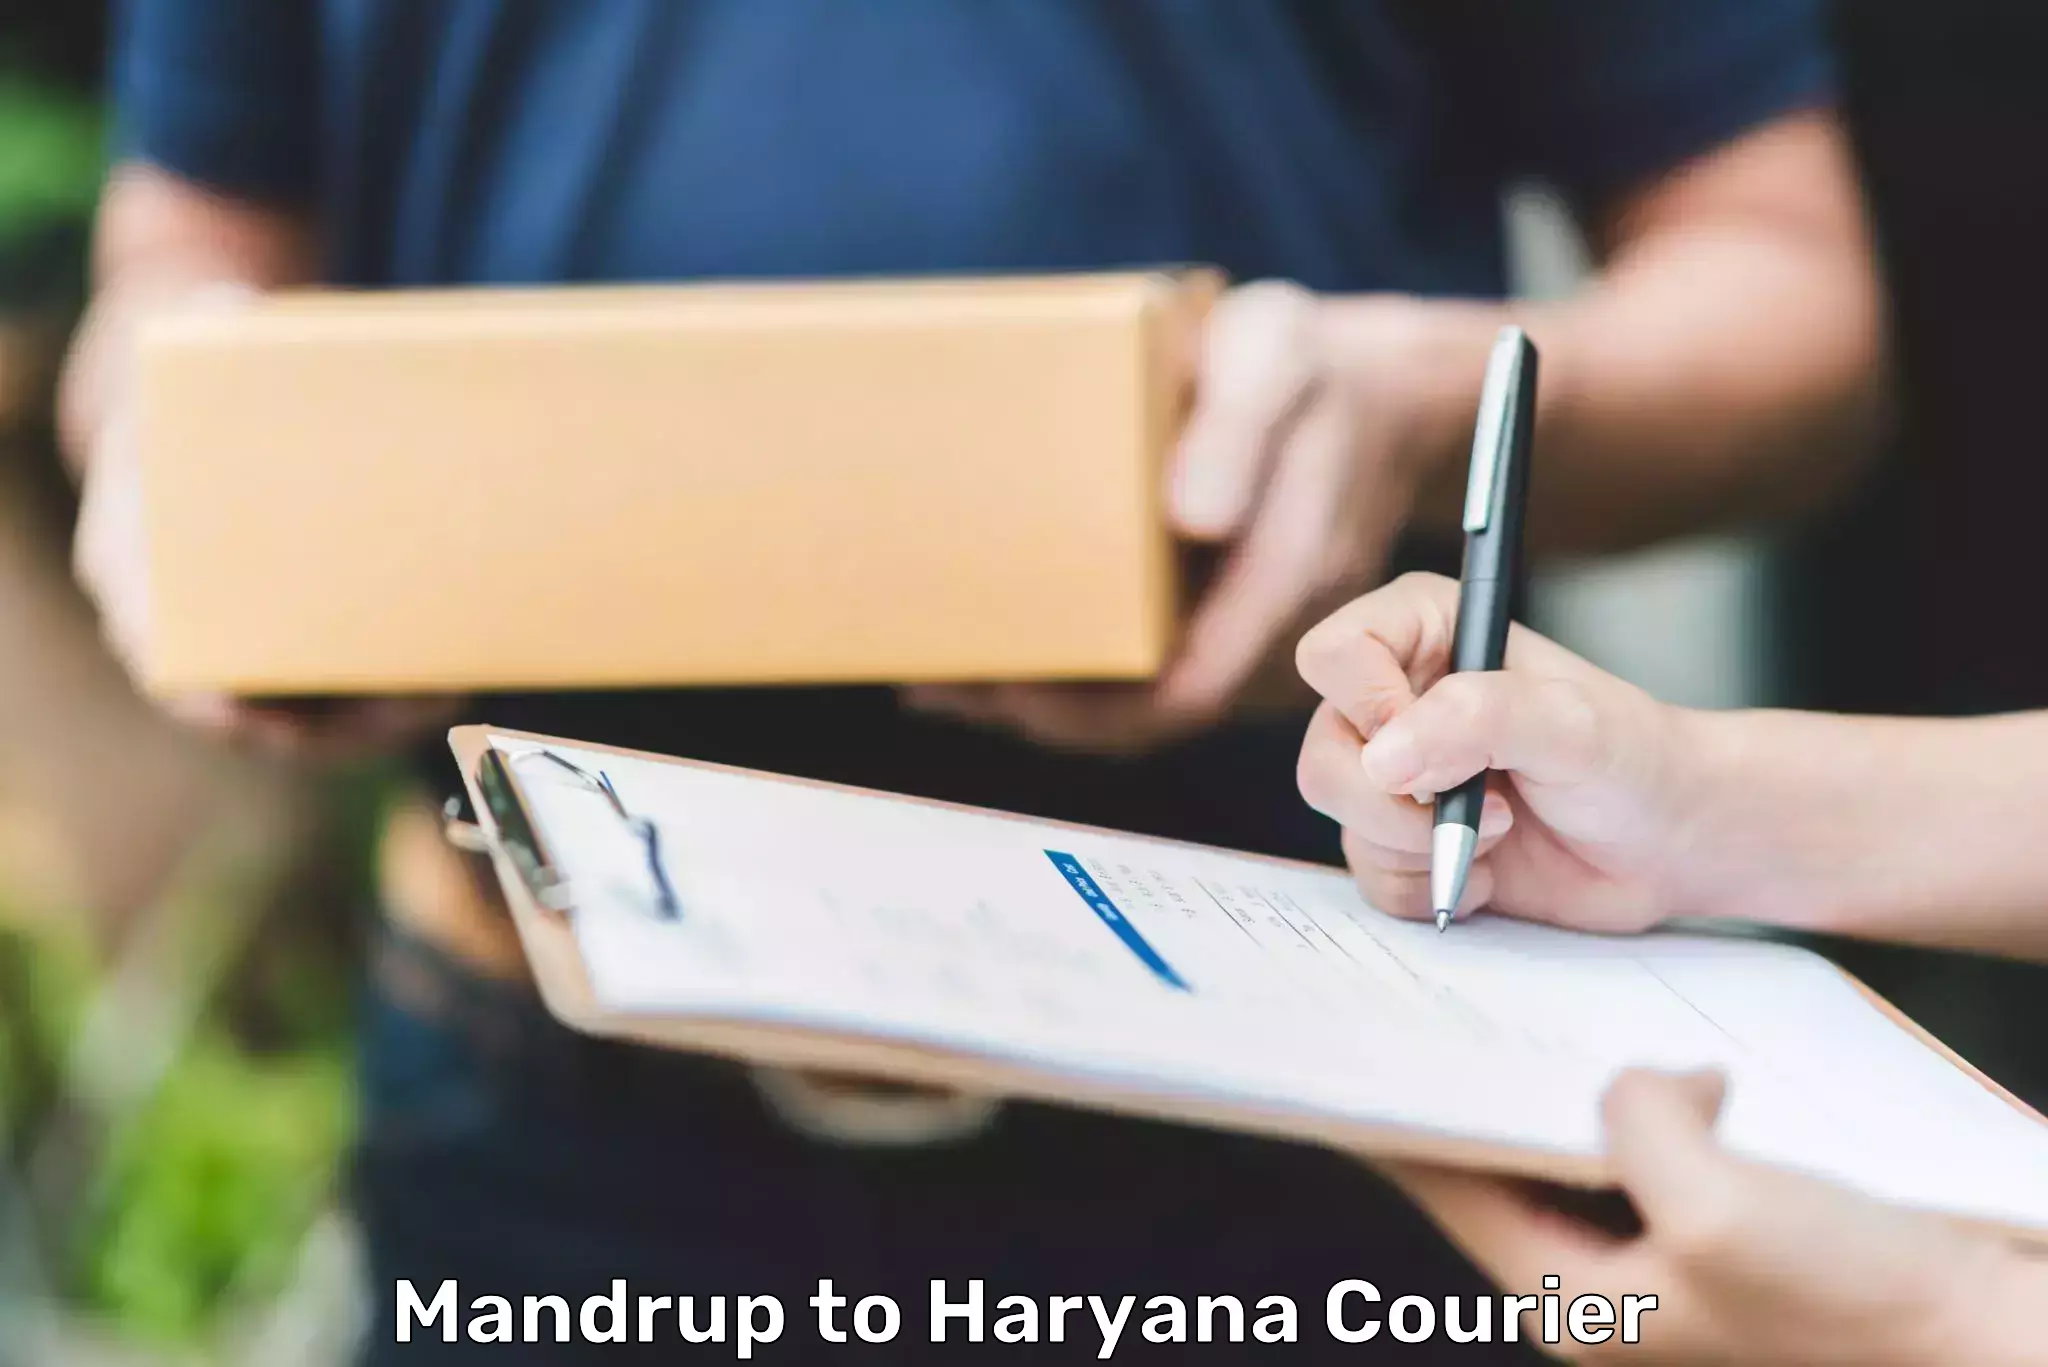 Advanced delivery network Mandrup to Haryana